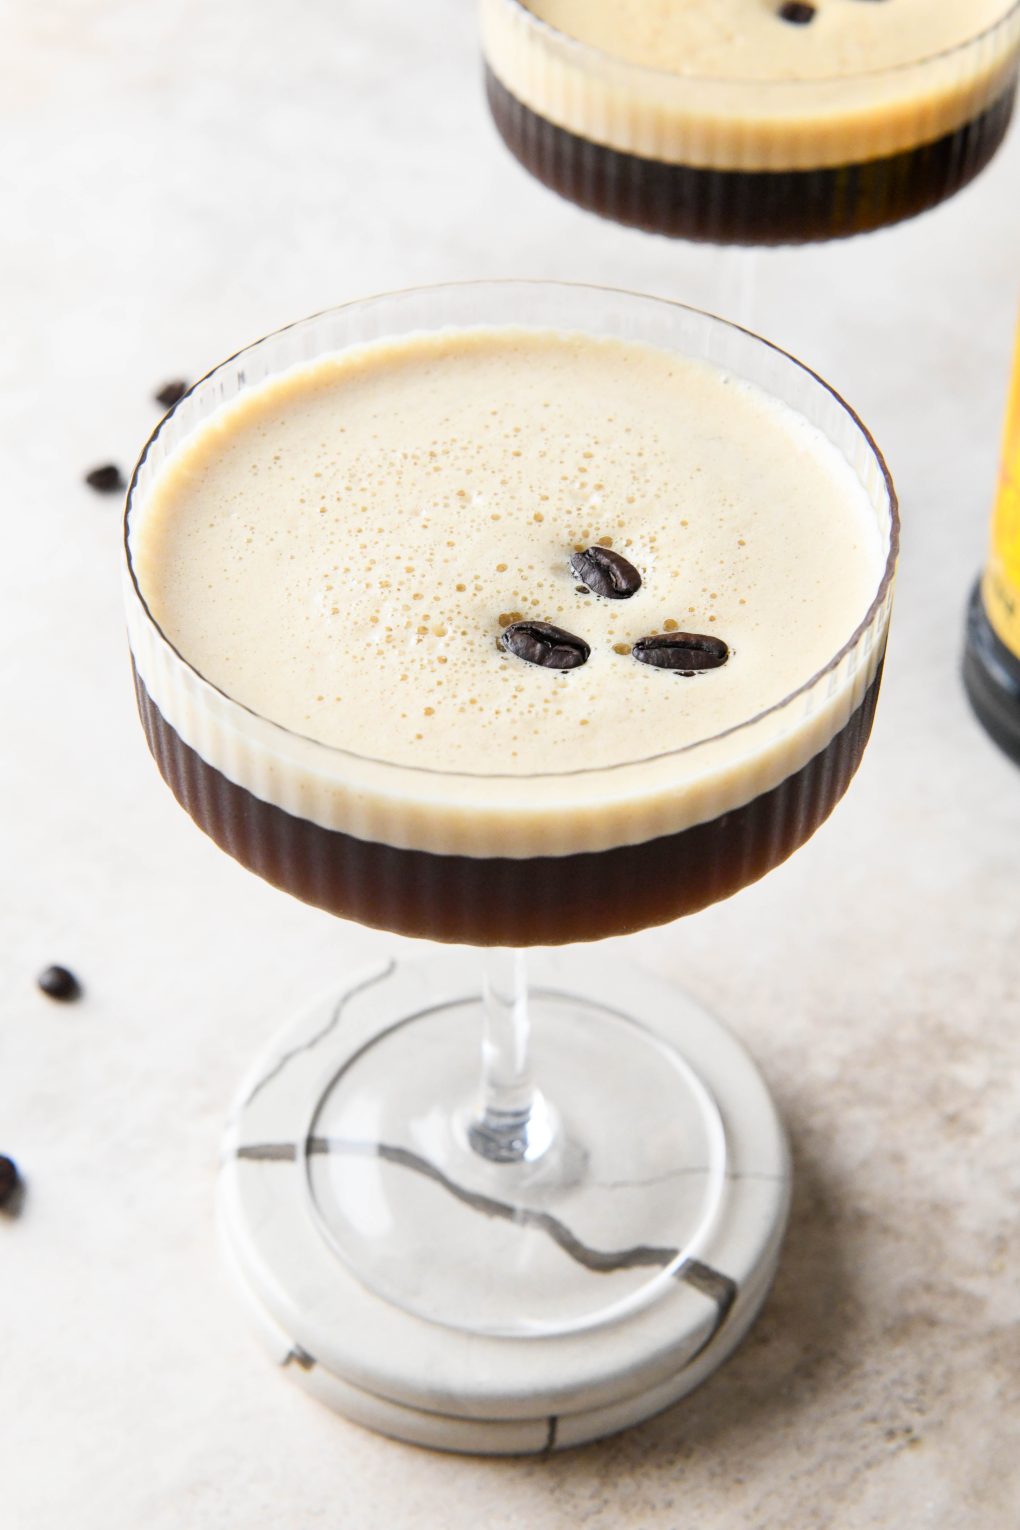 A 45 degree view of an espresso martini topped with 3 coffee beans on a light brown background.